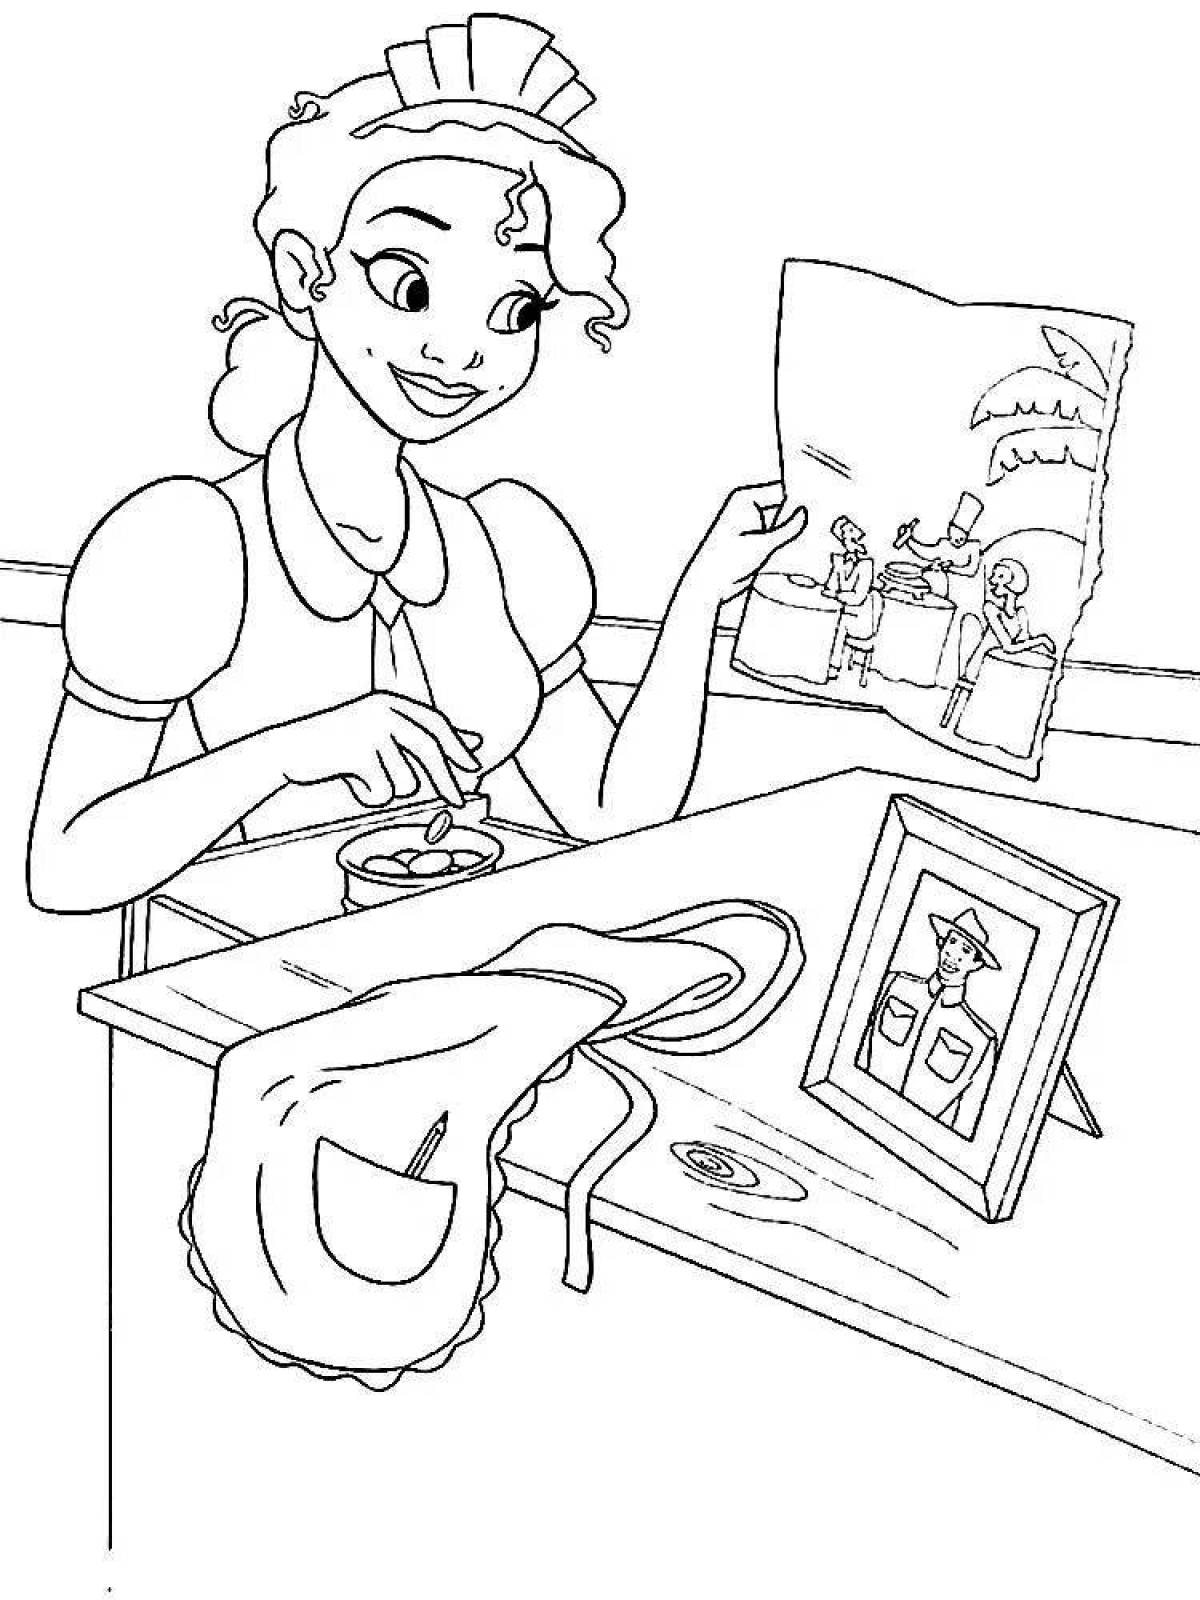 Cute frog princess coloring pages